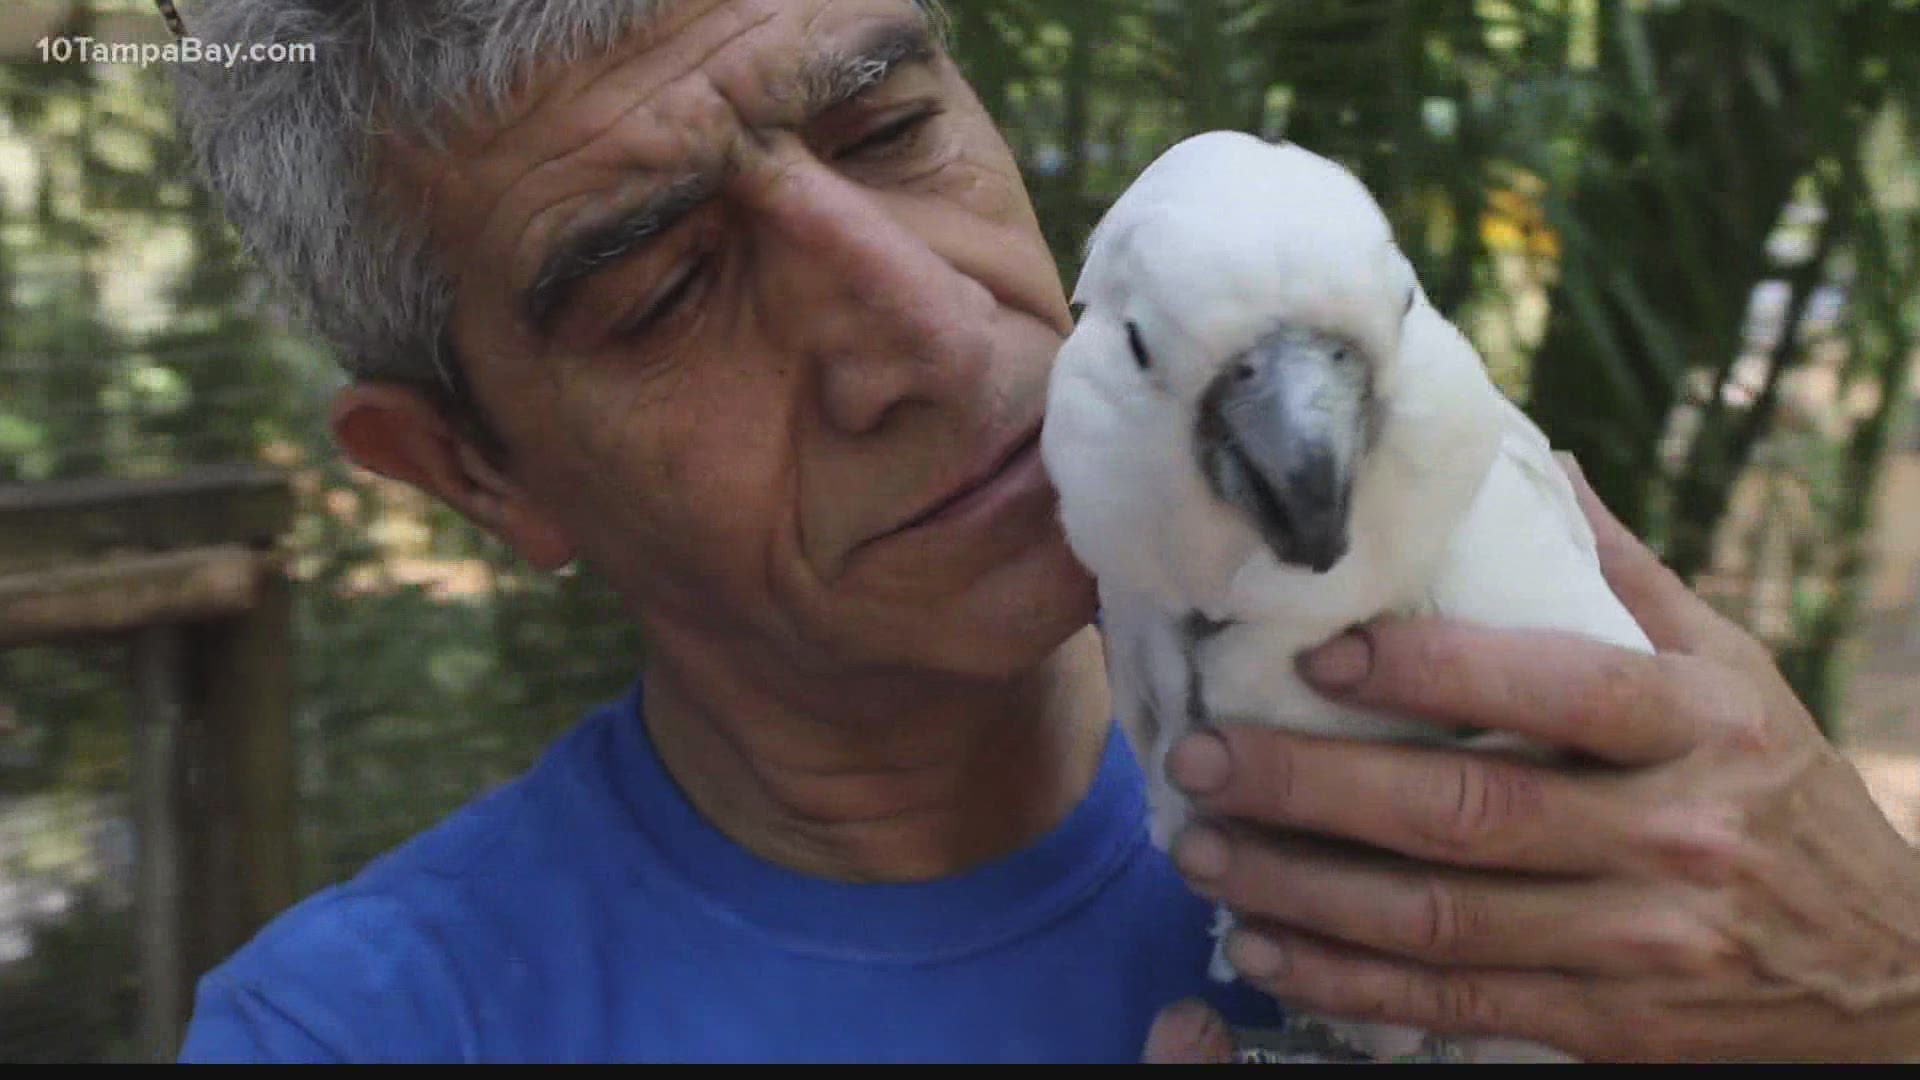 A Tampa author wrote about her love for Zaksee Parrot Sanctuary during the COVID-19 pandemic in hopes of gaining donations for the animal outreach.